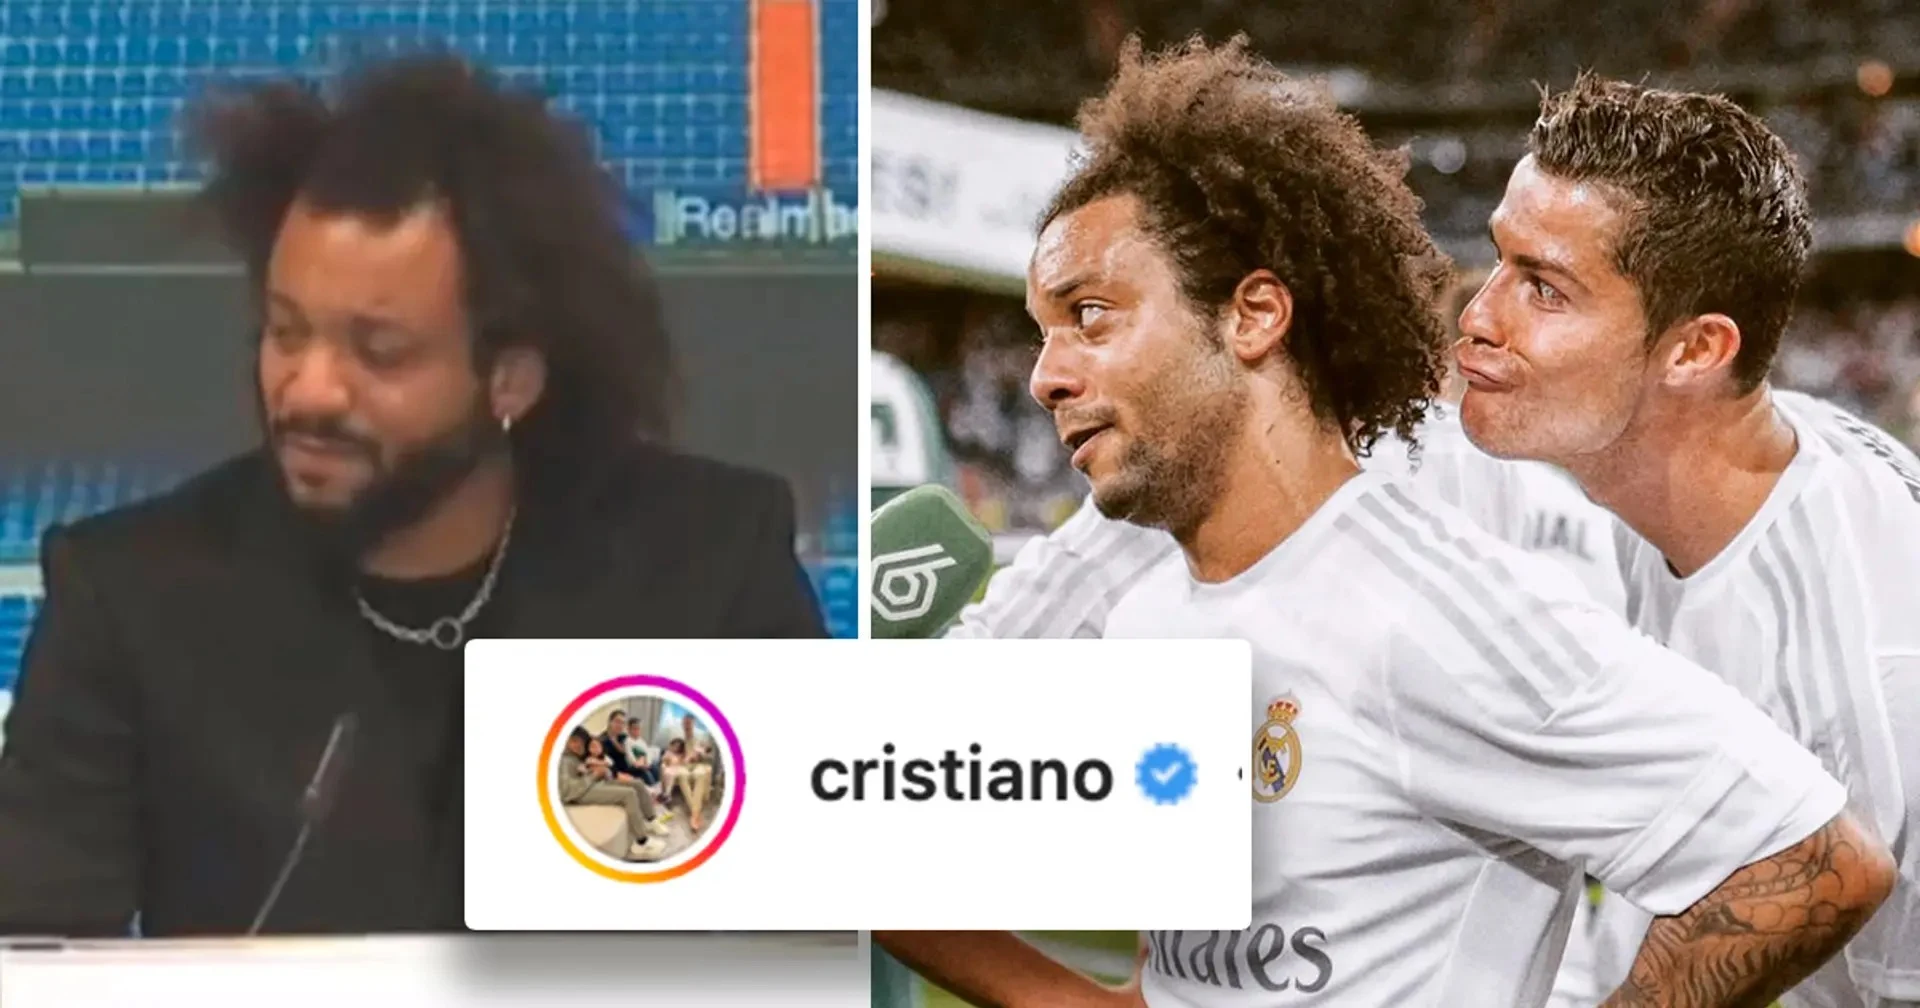 Cristiano Ronaldo sends special message to Marcelo on his Madrid farewell